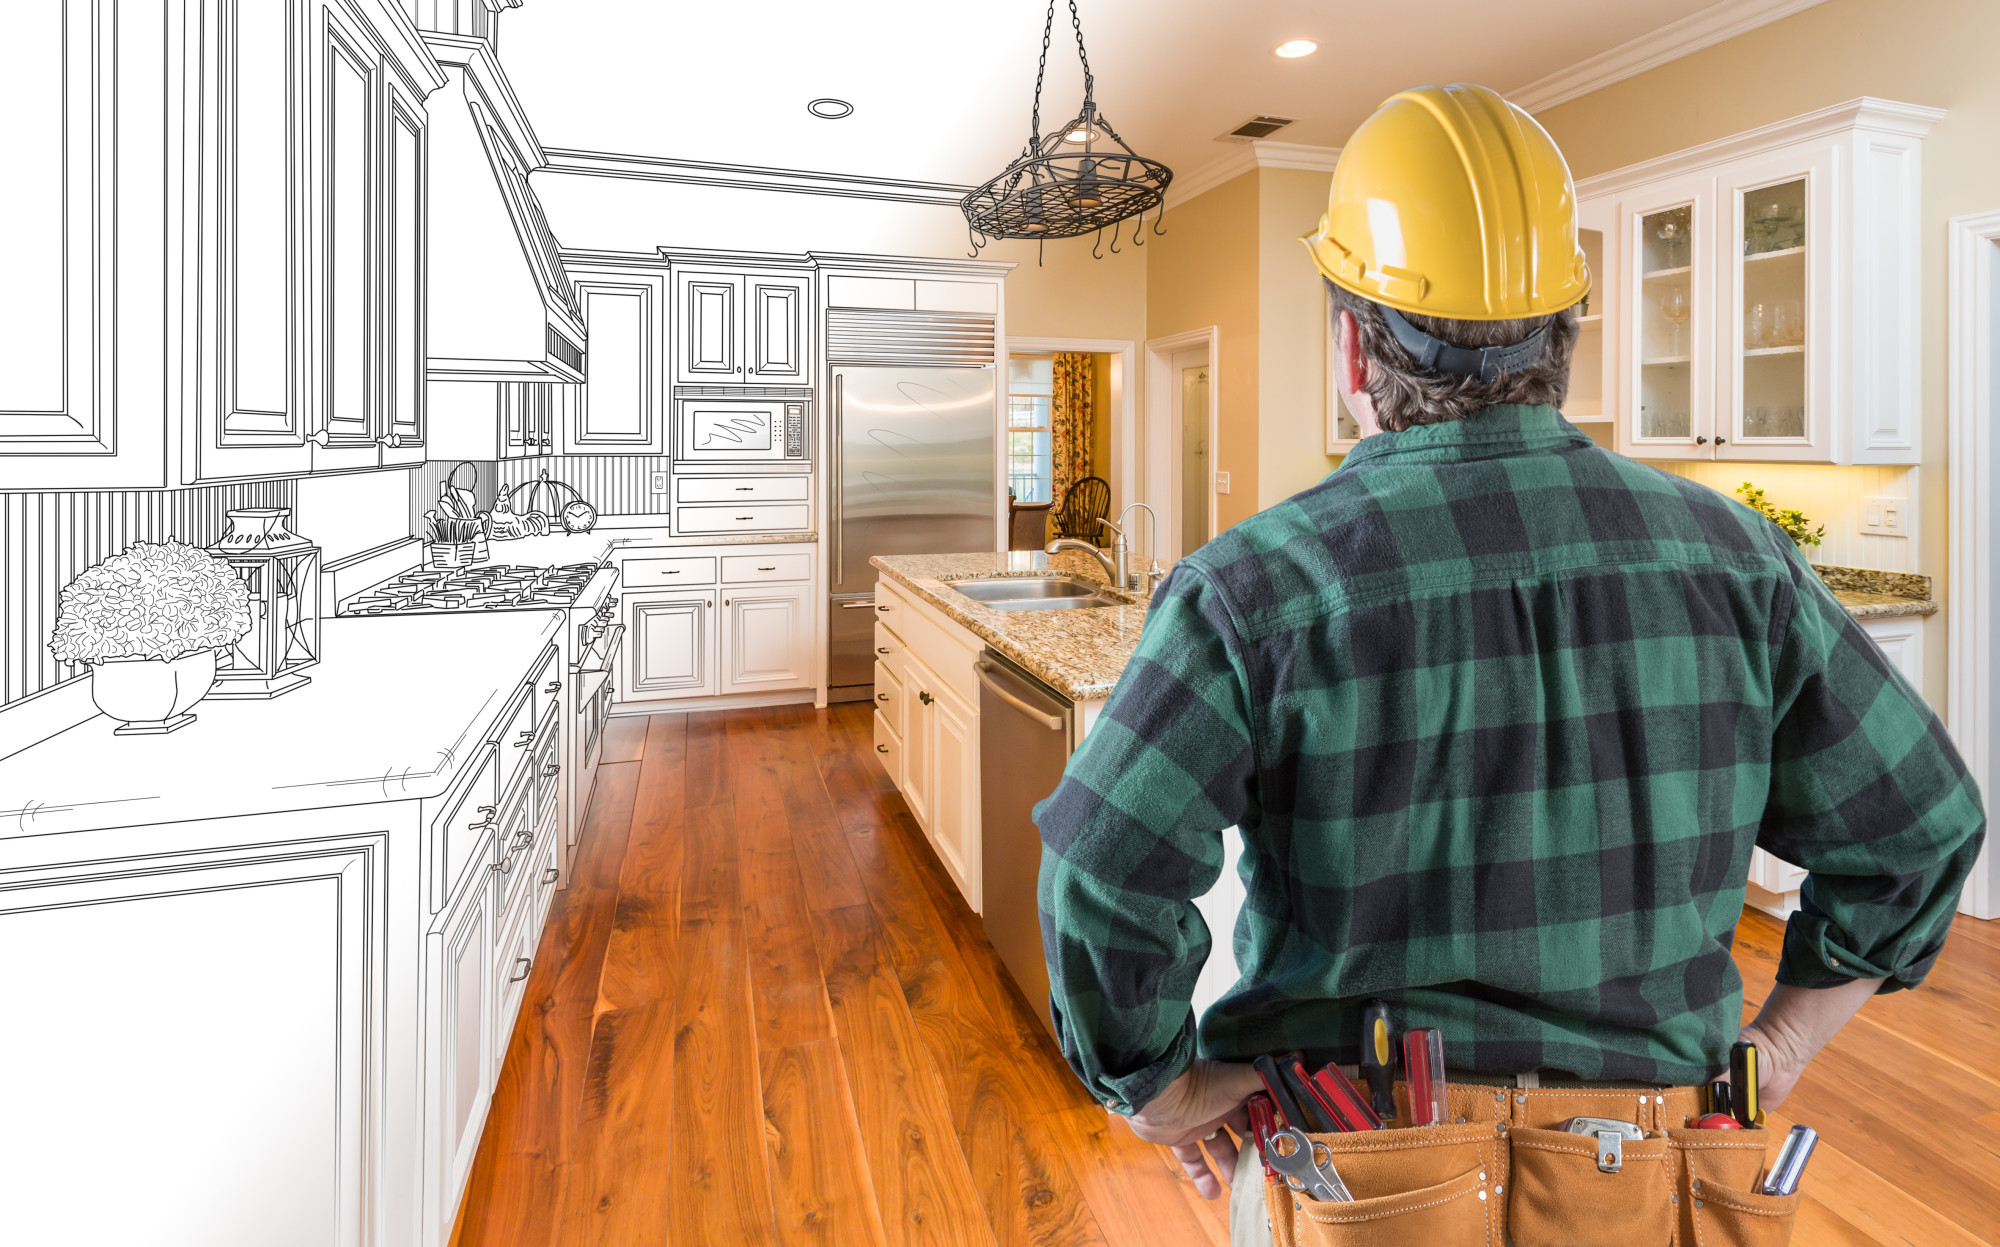 Are you getting ready to start a kitchen remodeling project? Let us help you out with this quick kitchen renovation checklist.